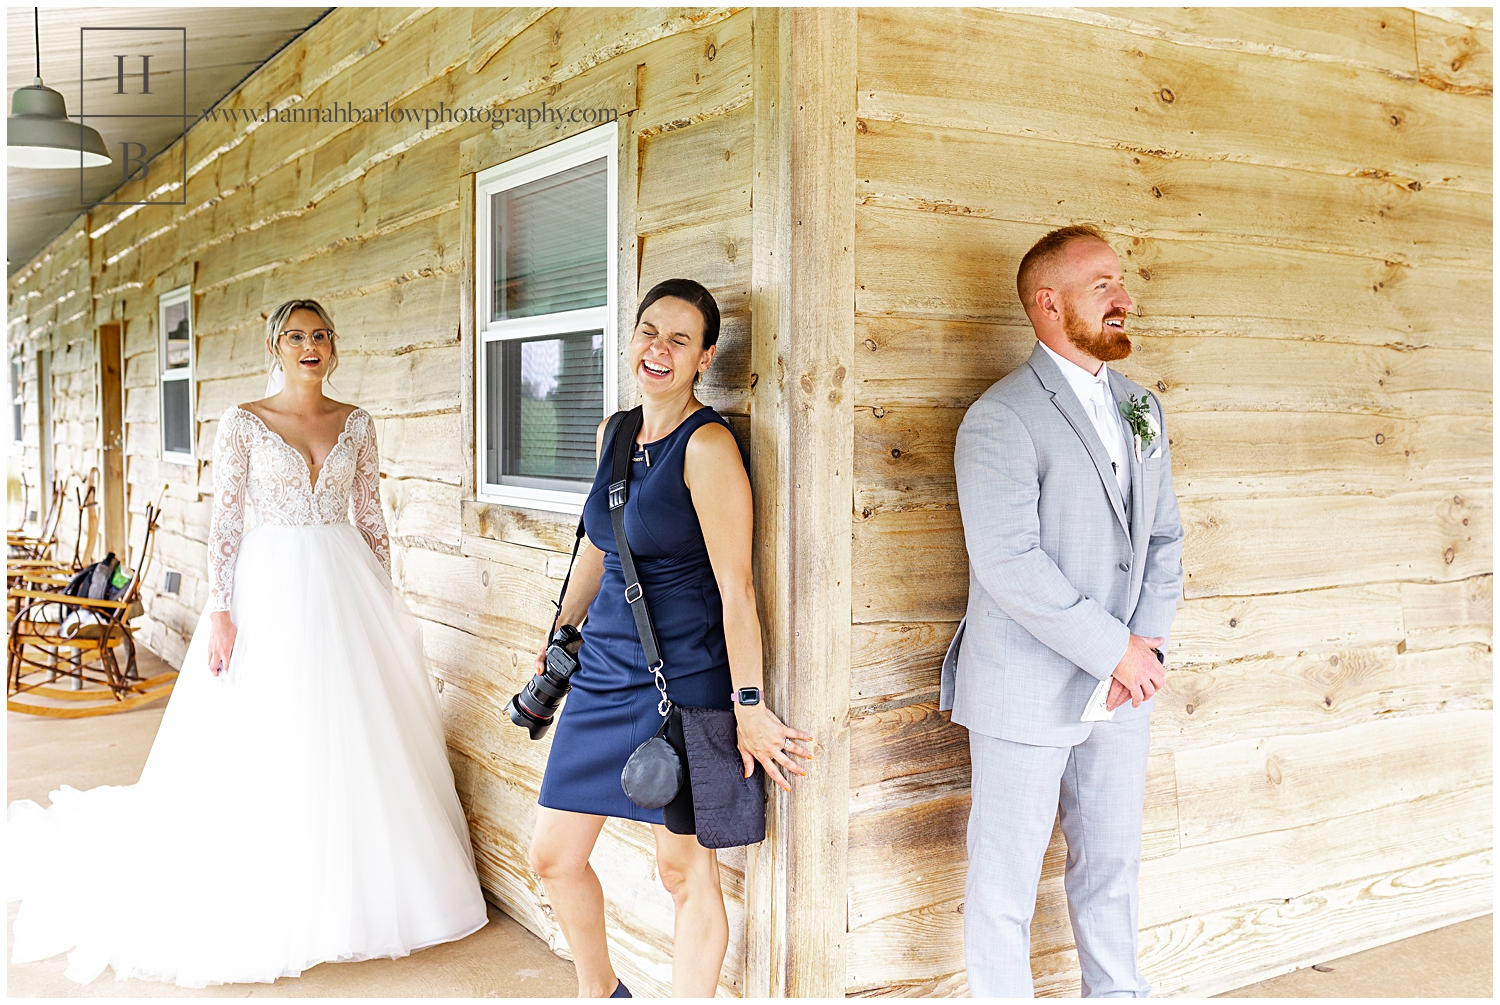 Wedding photographer stands with groom against barn and laughs.